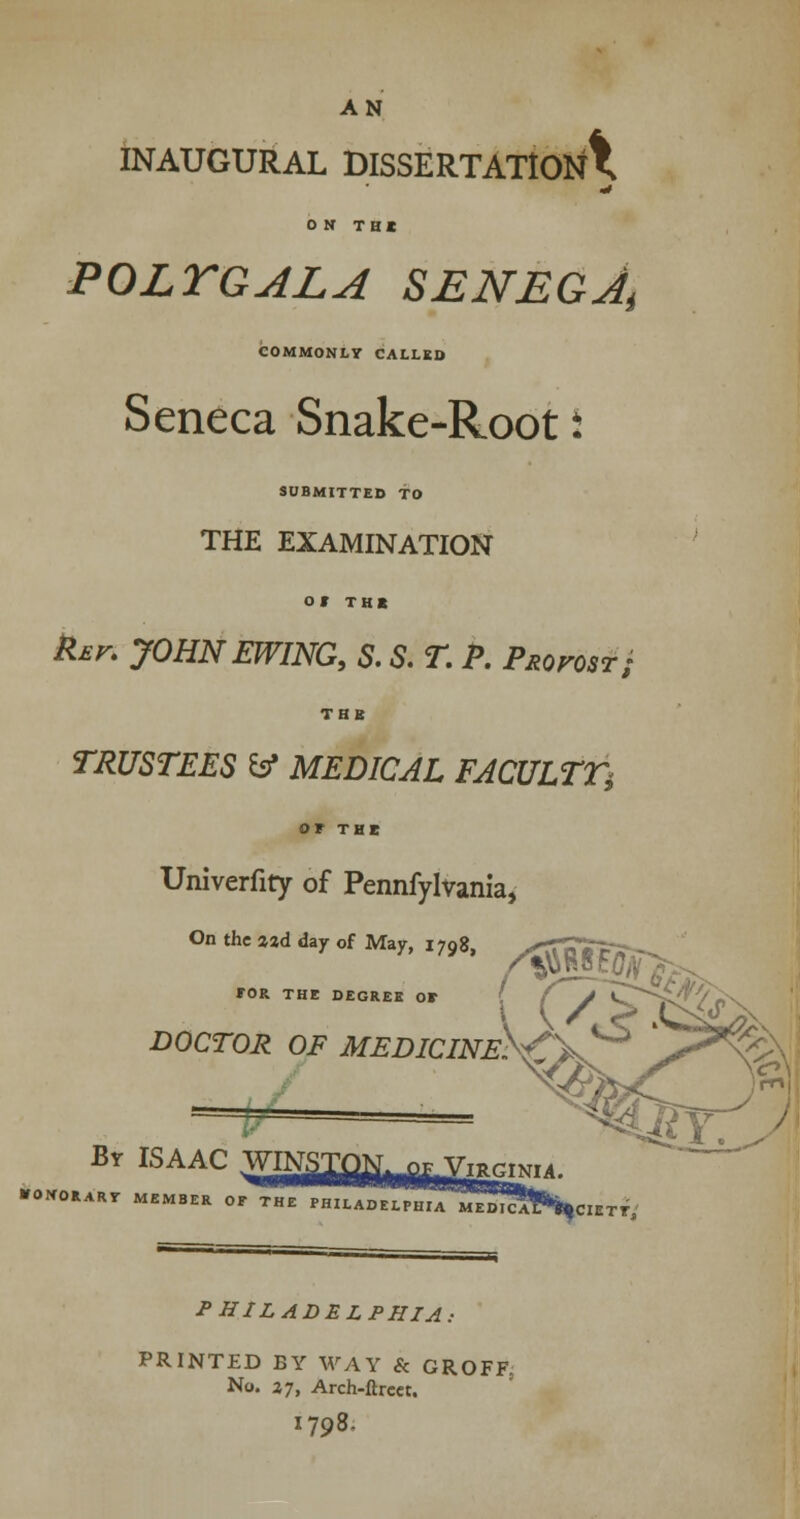 AN INAUGURAL DISSERTATION^ ON TBI POLYGALA SEN EG At COMMONLY CALLED Seneca Snake-Root 5 SUBMITTED TO THE EXAMINATION Of THt far. JOHNEWING, S. S. T. P. Provost; TBI TRUSTEES & MEDICAL FACULTY or THE Univerfity of Pennfylvania, On the aad day of May, 1798, *OR THE DEGREE OF [ / J ~CrS DOCTOR OF MEDICINESf\^ •■ M Br ISAAC = ^^t: •fONORART MEMBER OF THE PHILADELrW M^DIC^bciETY, PHILADELPHIA: PRINTED BY WAY & GROFF. No. 27, Arch-ftrcer. 1798.